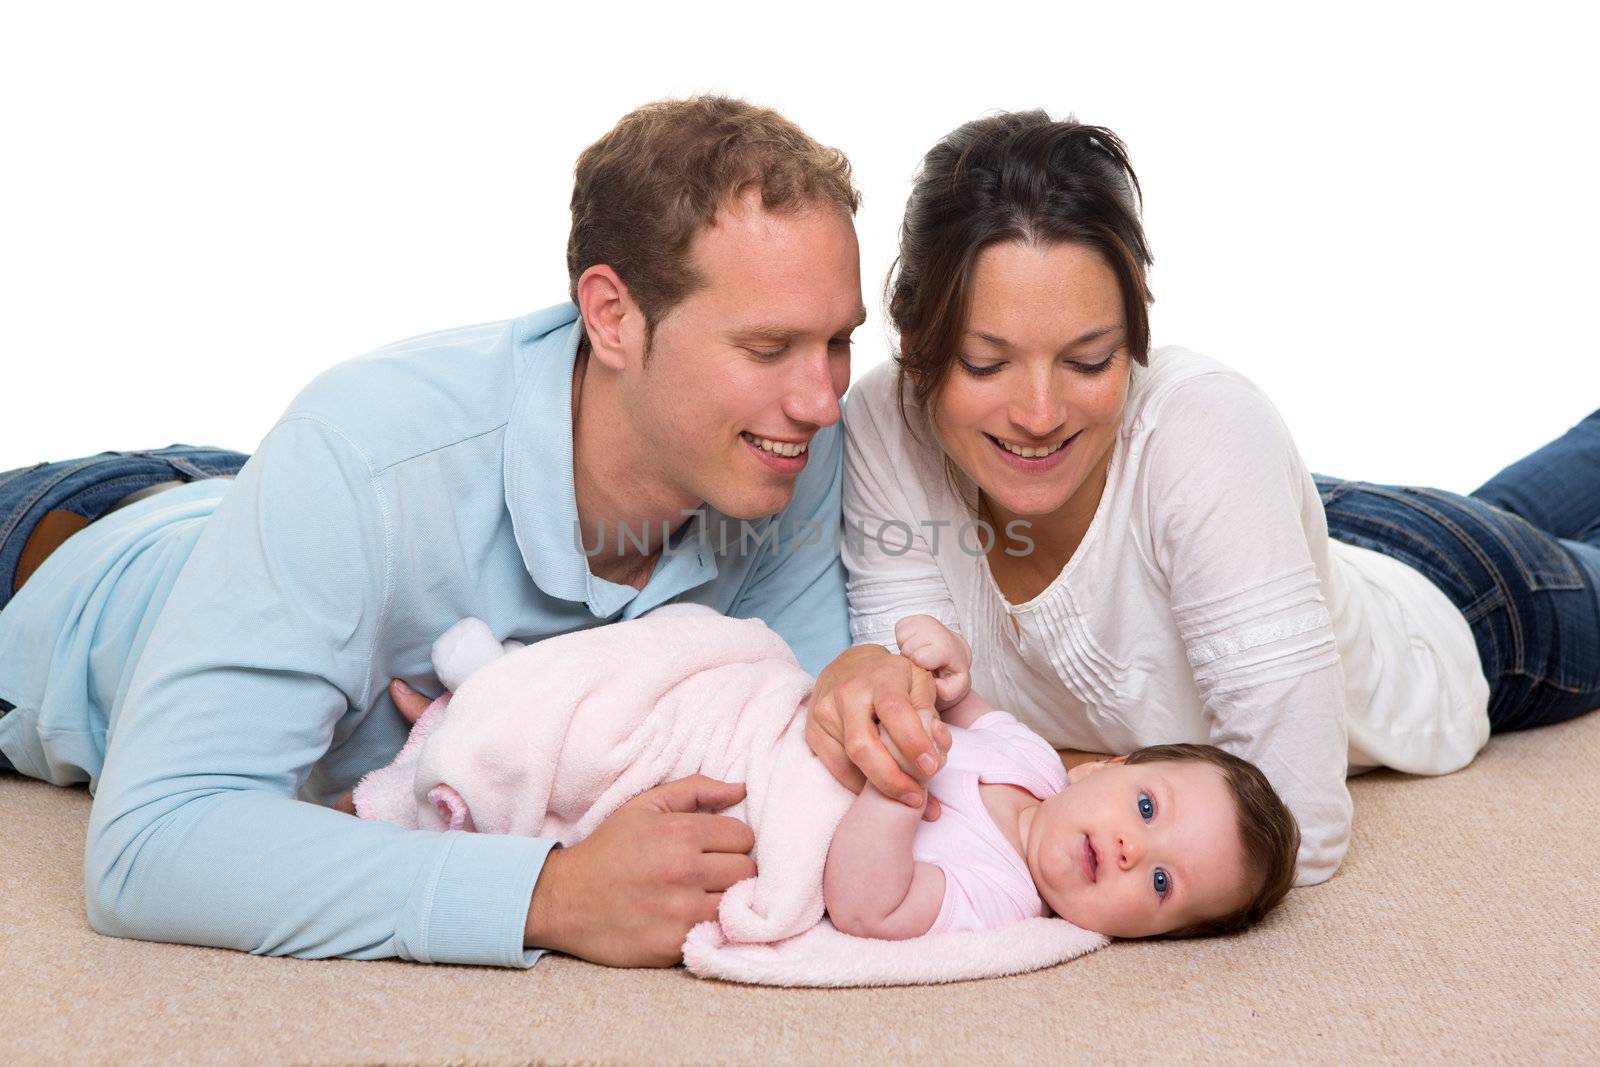 Baby mother and father happy family portrait lying on carpet and white background